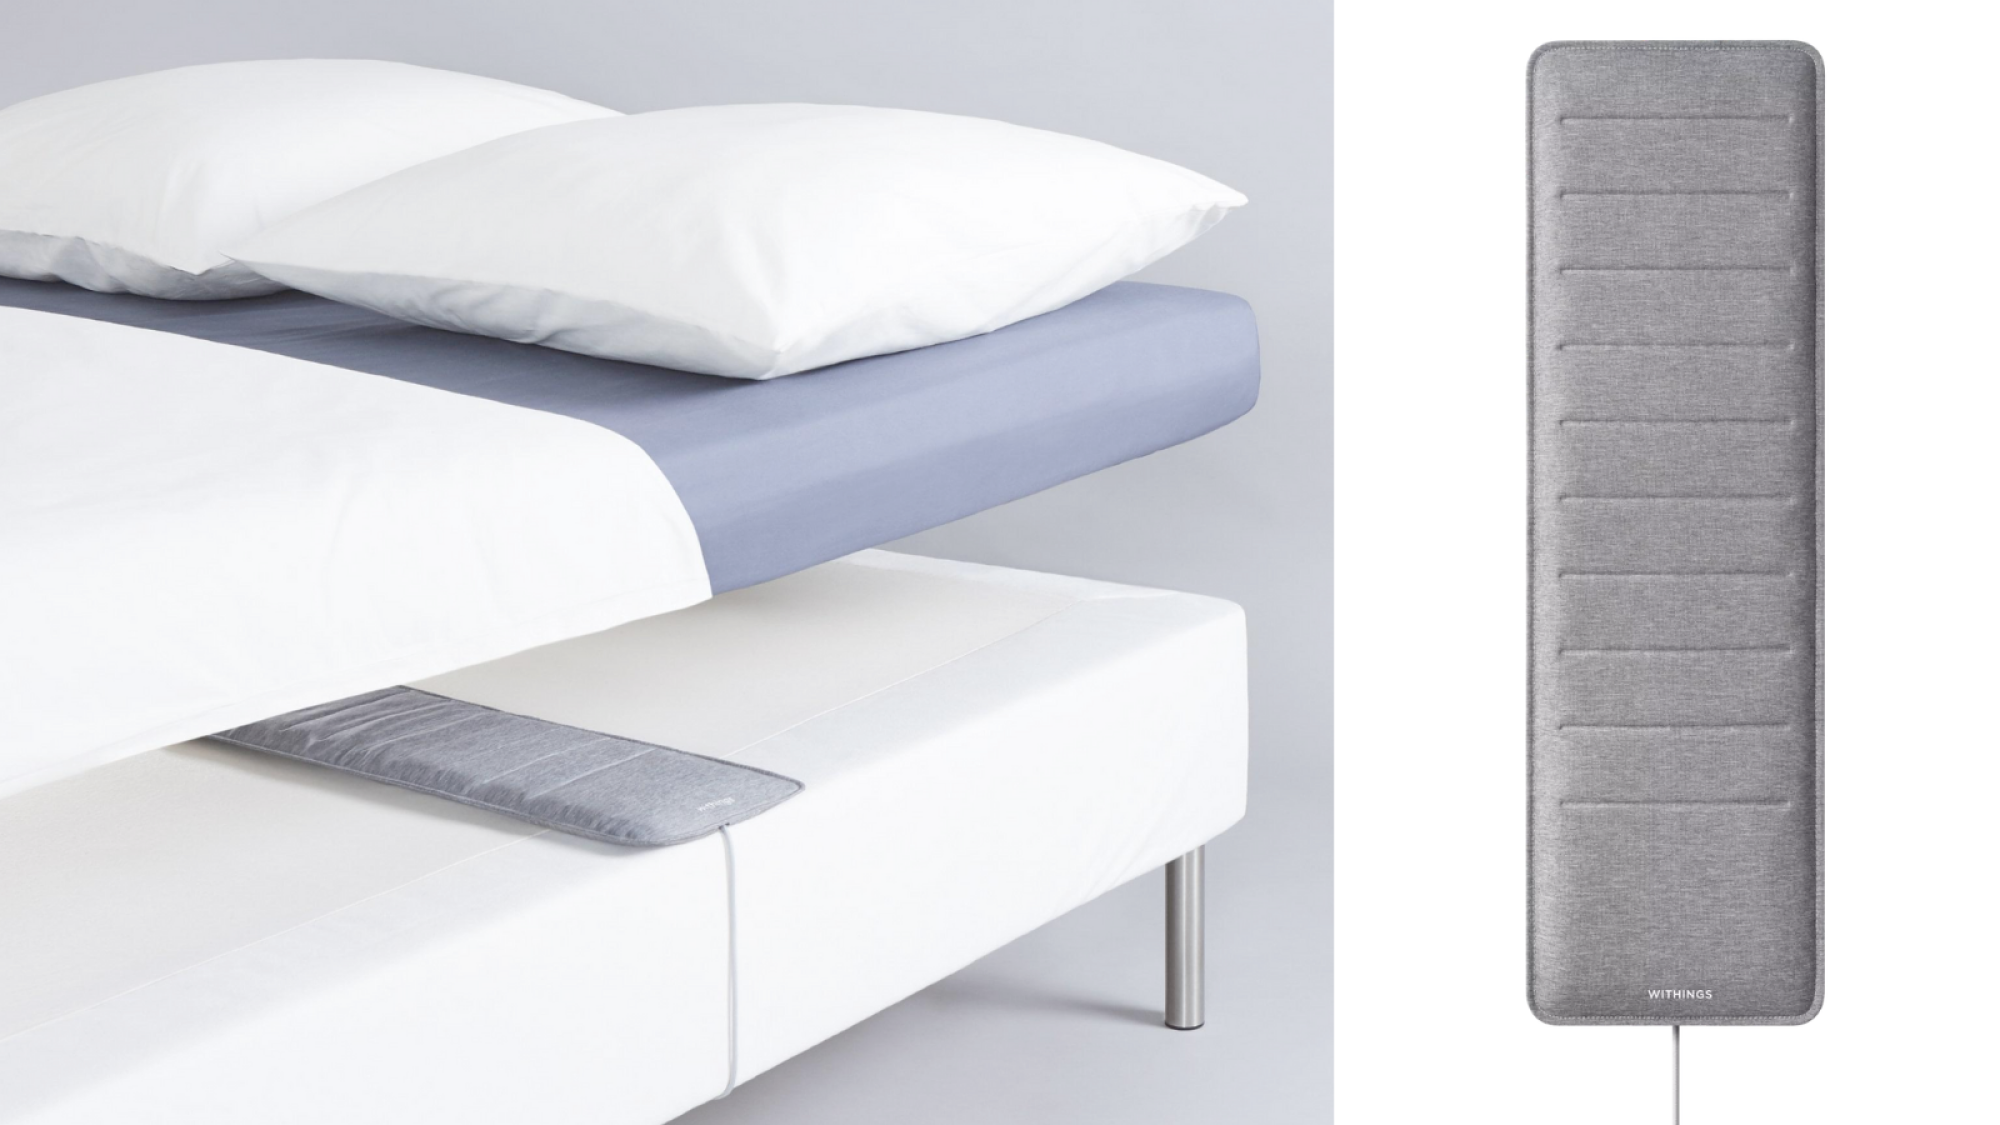 A composite of images of the Withings Sleep Analyser, first on a bed and then by itself.